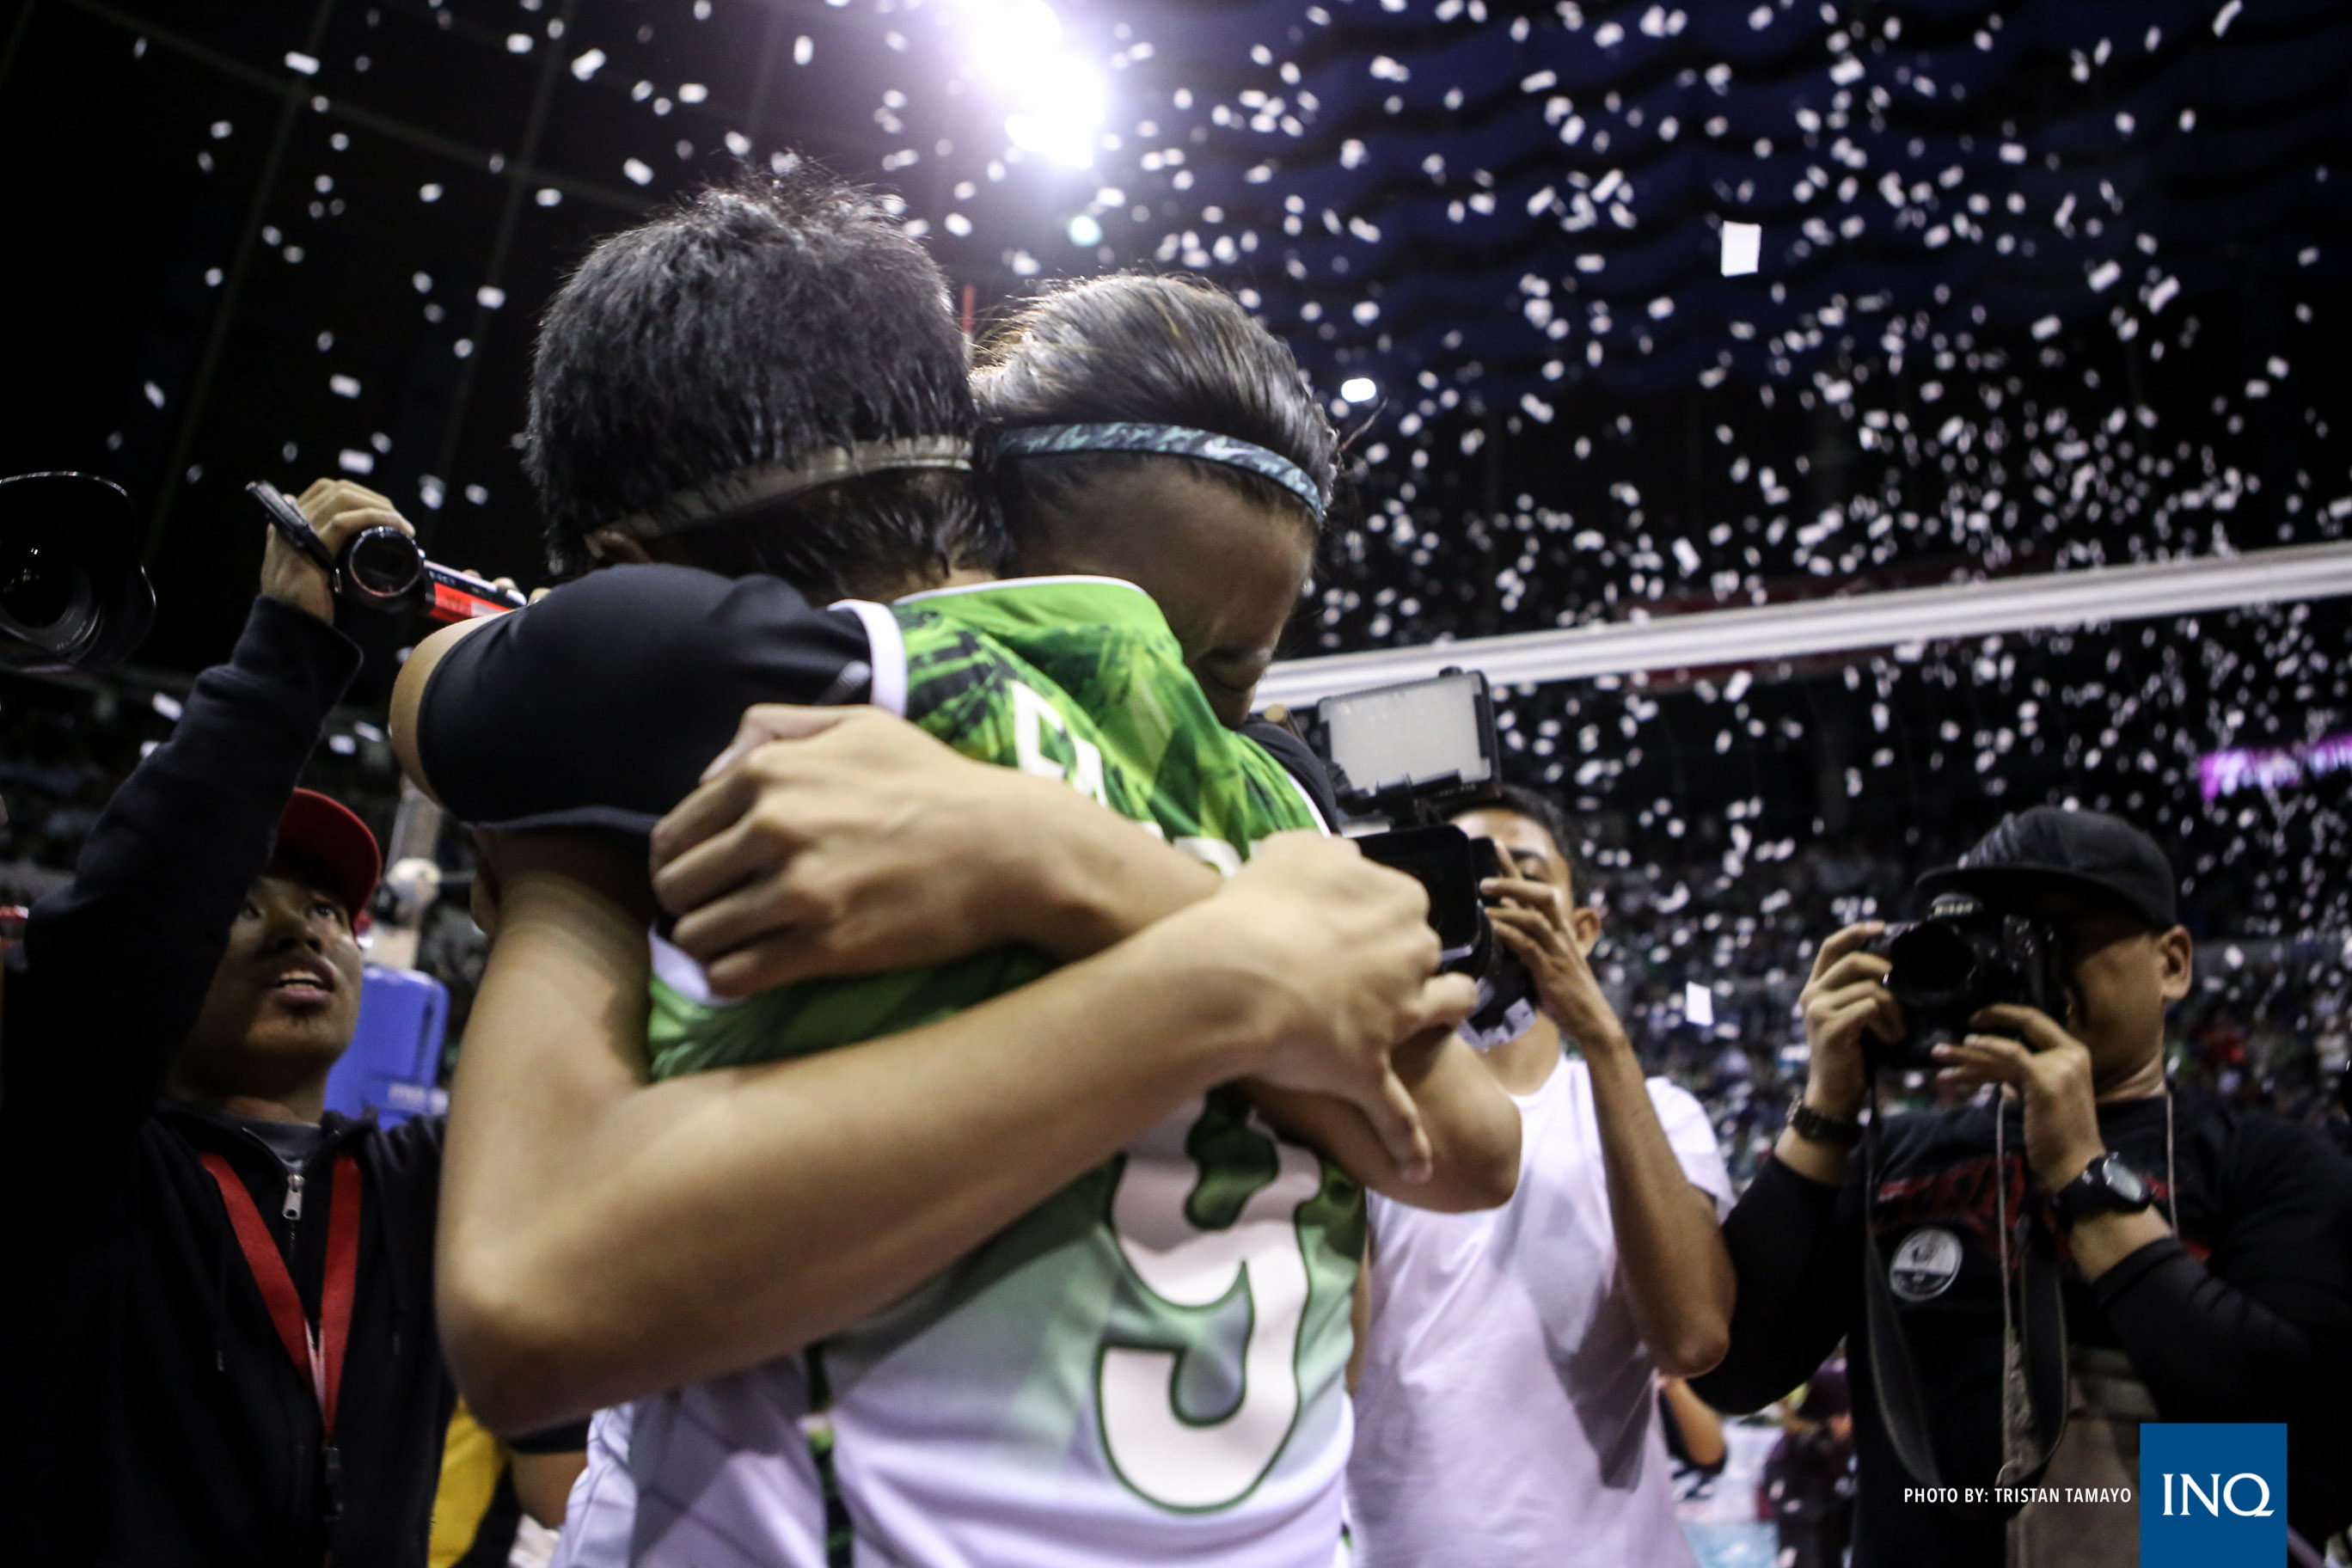 La Salle's Kim Fajardo and Kim Dy share an emotional moment after the Lady Spikers clinched their second straight UAAP title. Tristan Tamayo/INQUIRER.net